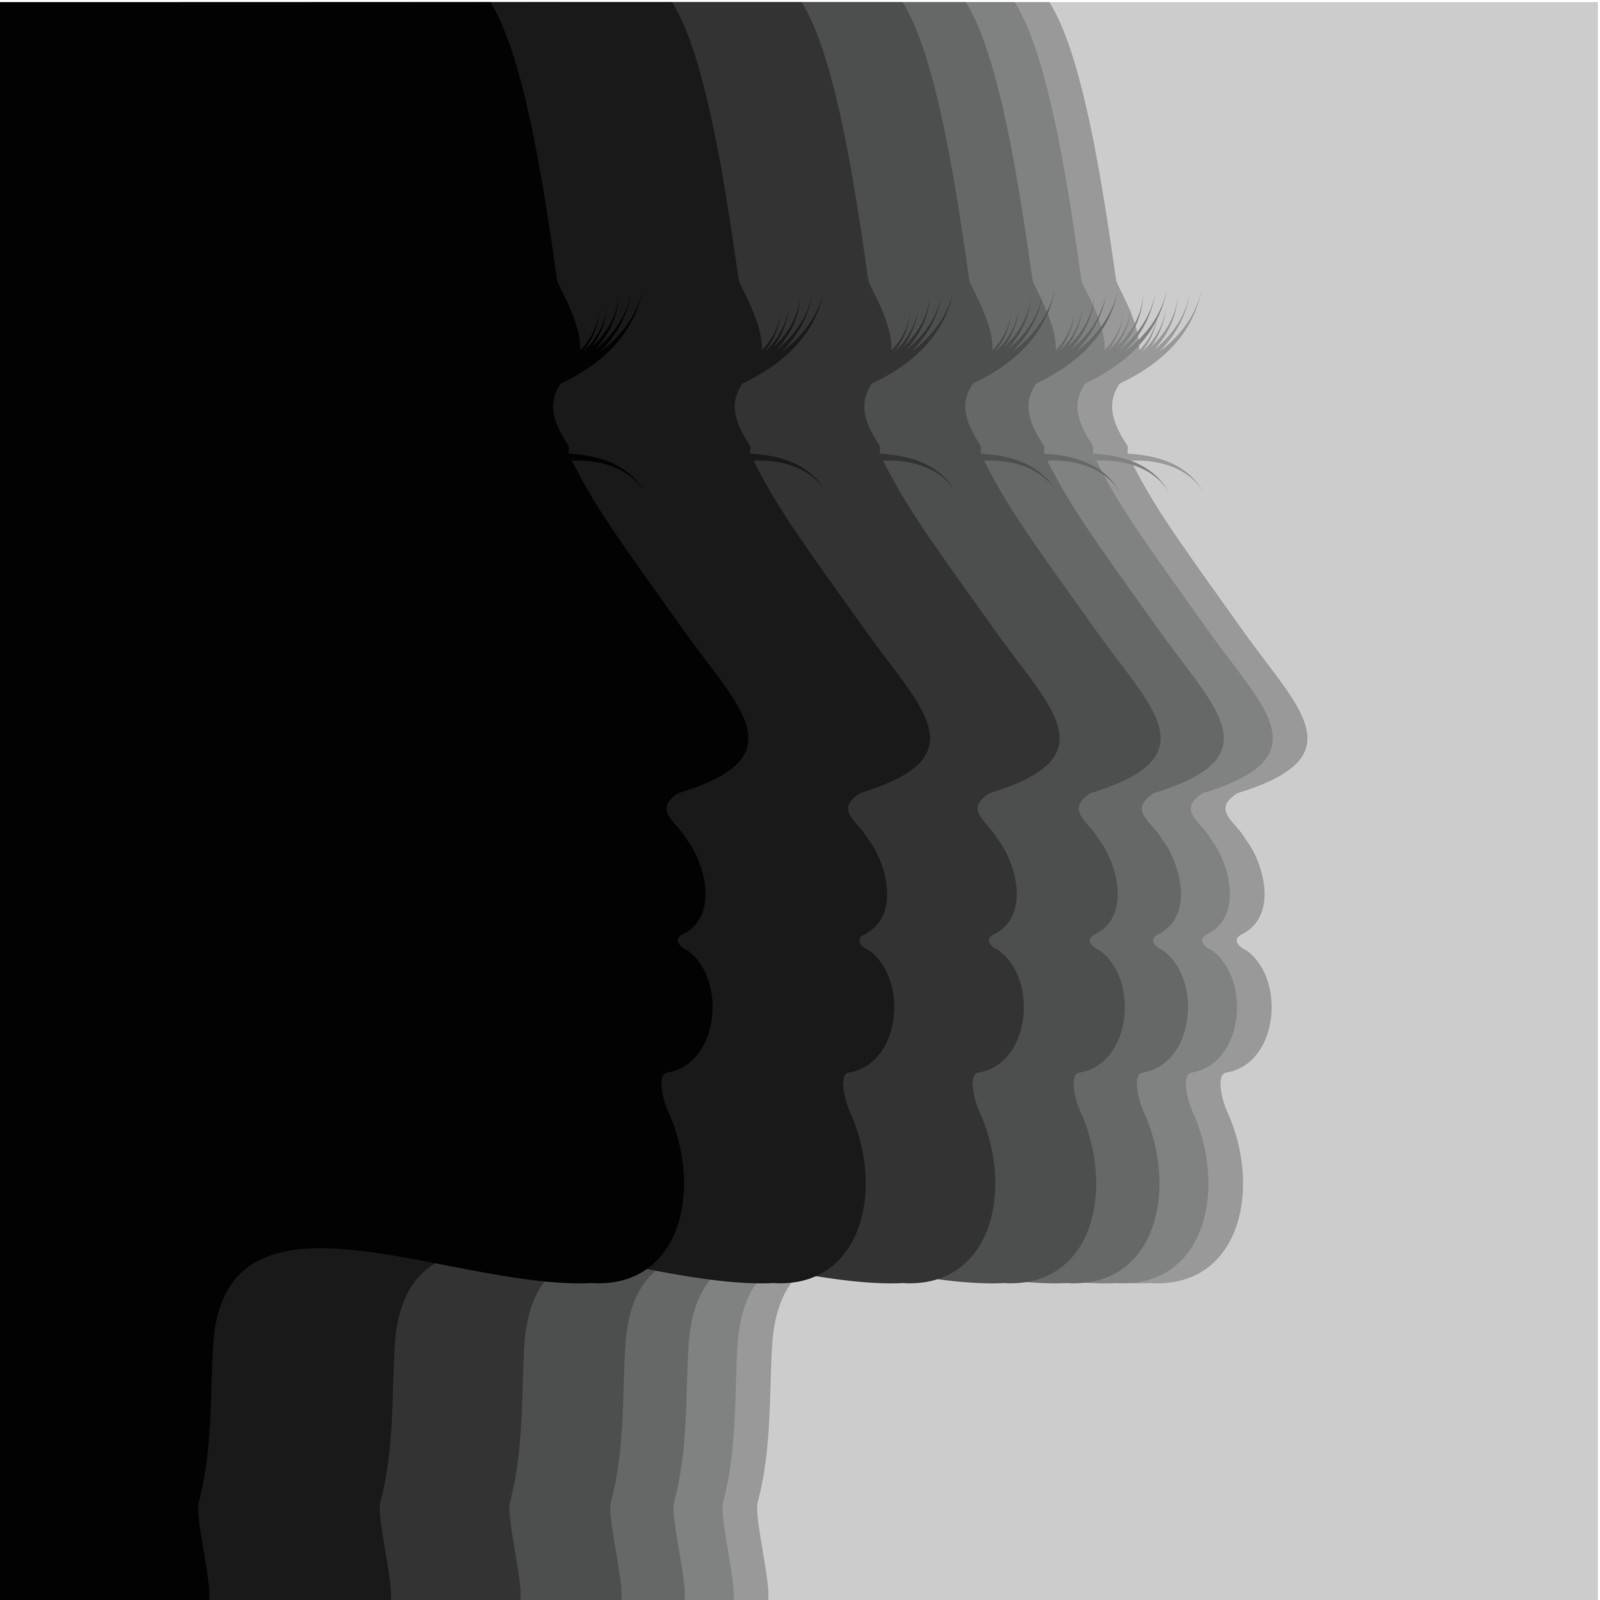 Silhouette the person of the girl. A vector illustration